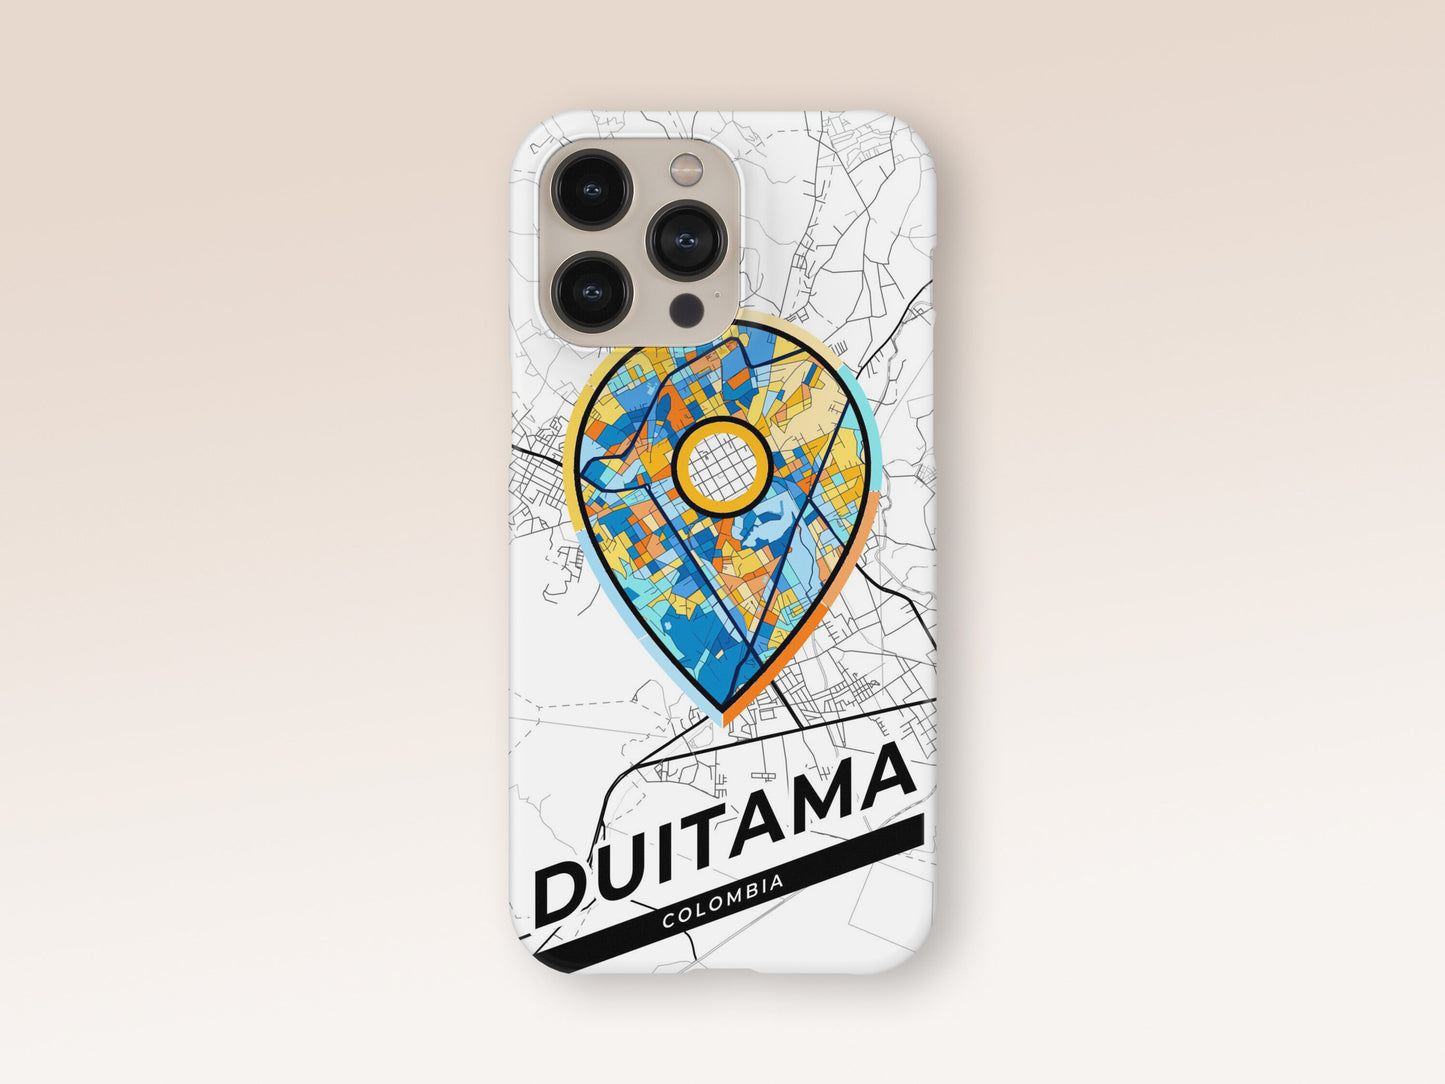 Duitama Colombia slim phone case with colorful icon. Birthday, wedding or housewarming gift. Couple match cases. 1